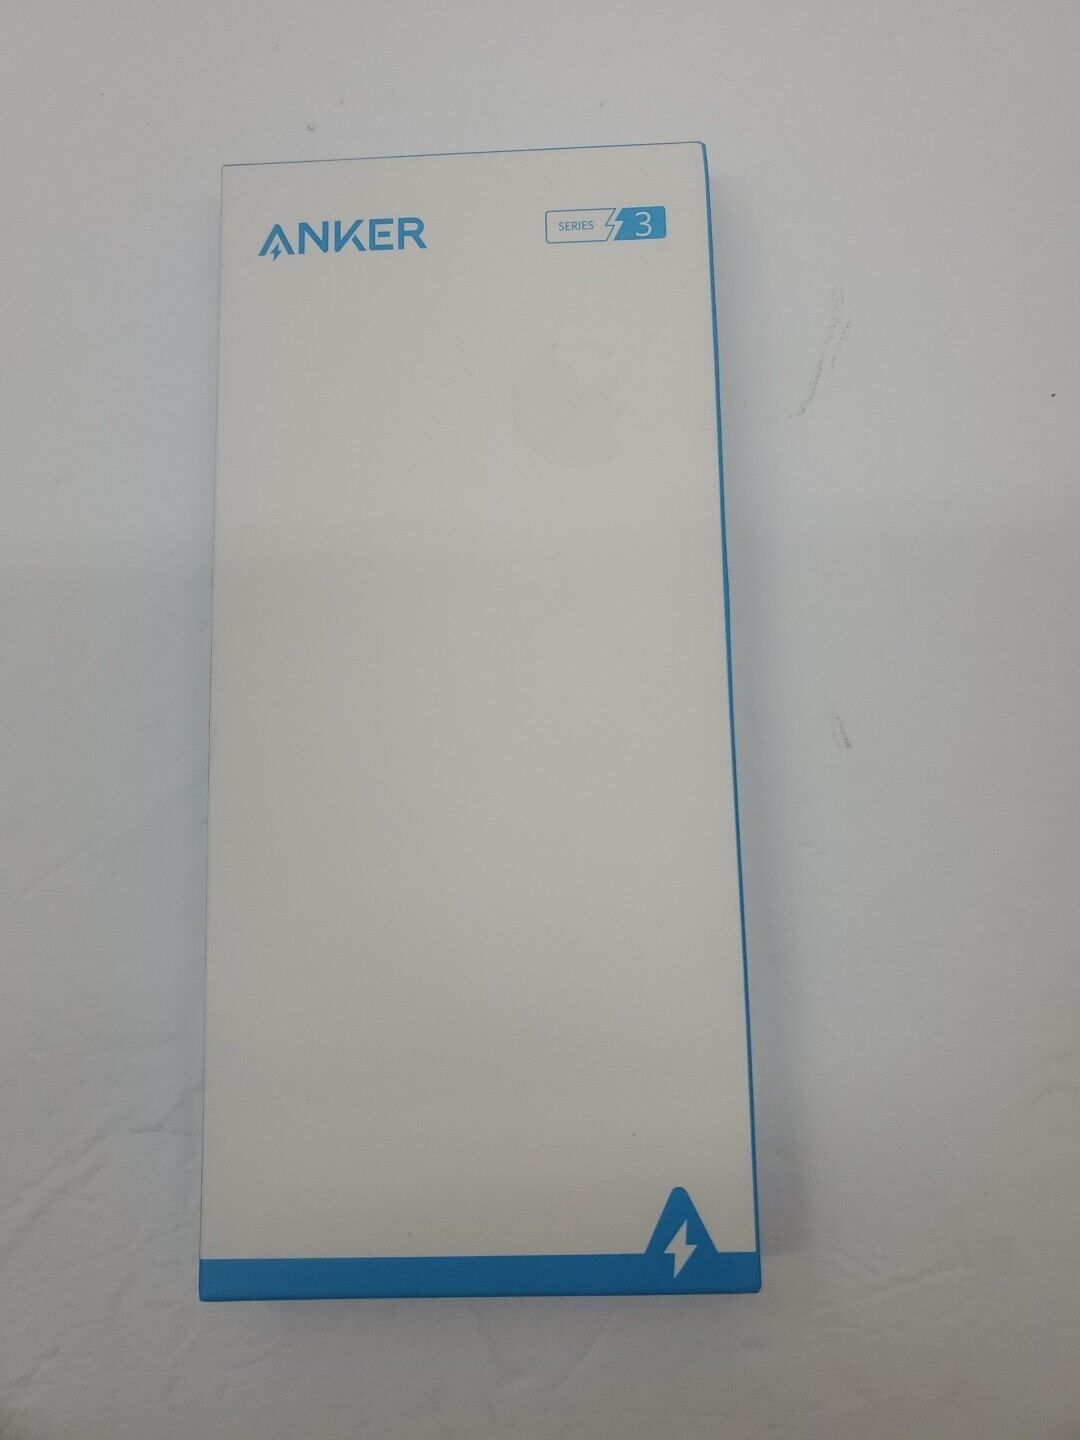 Anker 332 USB-C Hub Adapter 5-in-1 4K HDMI Display 85W Charge